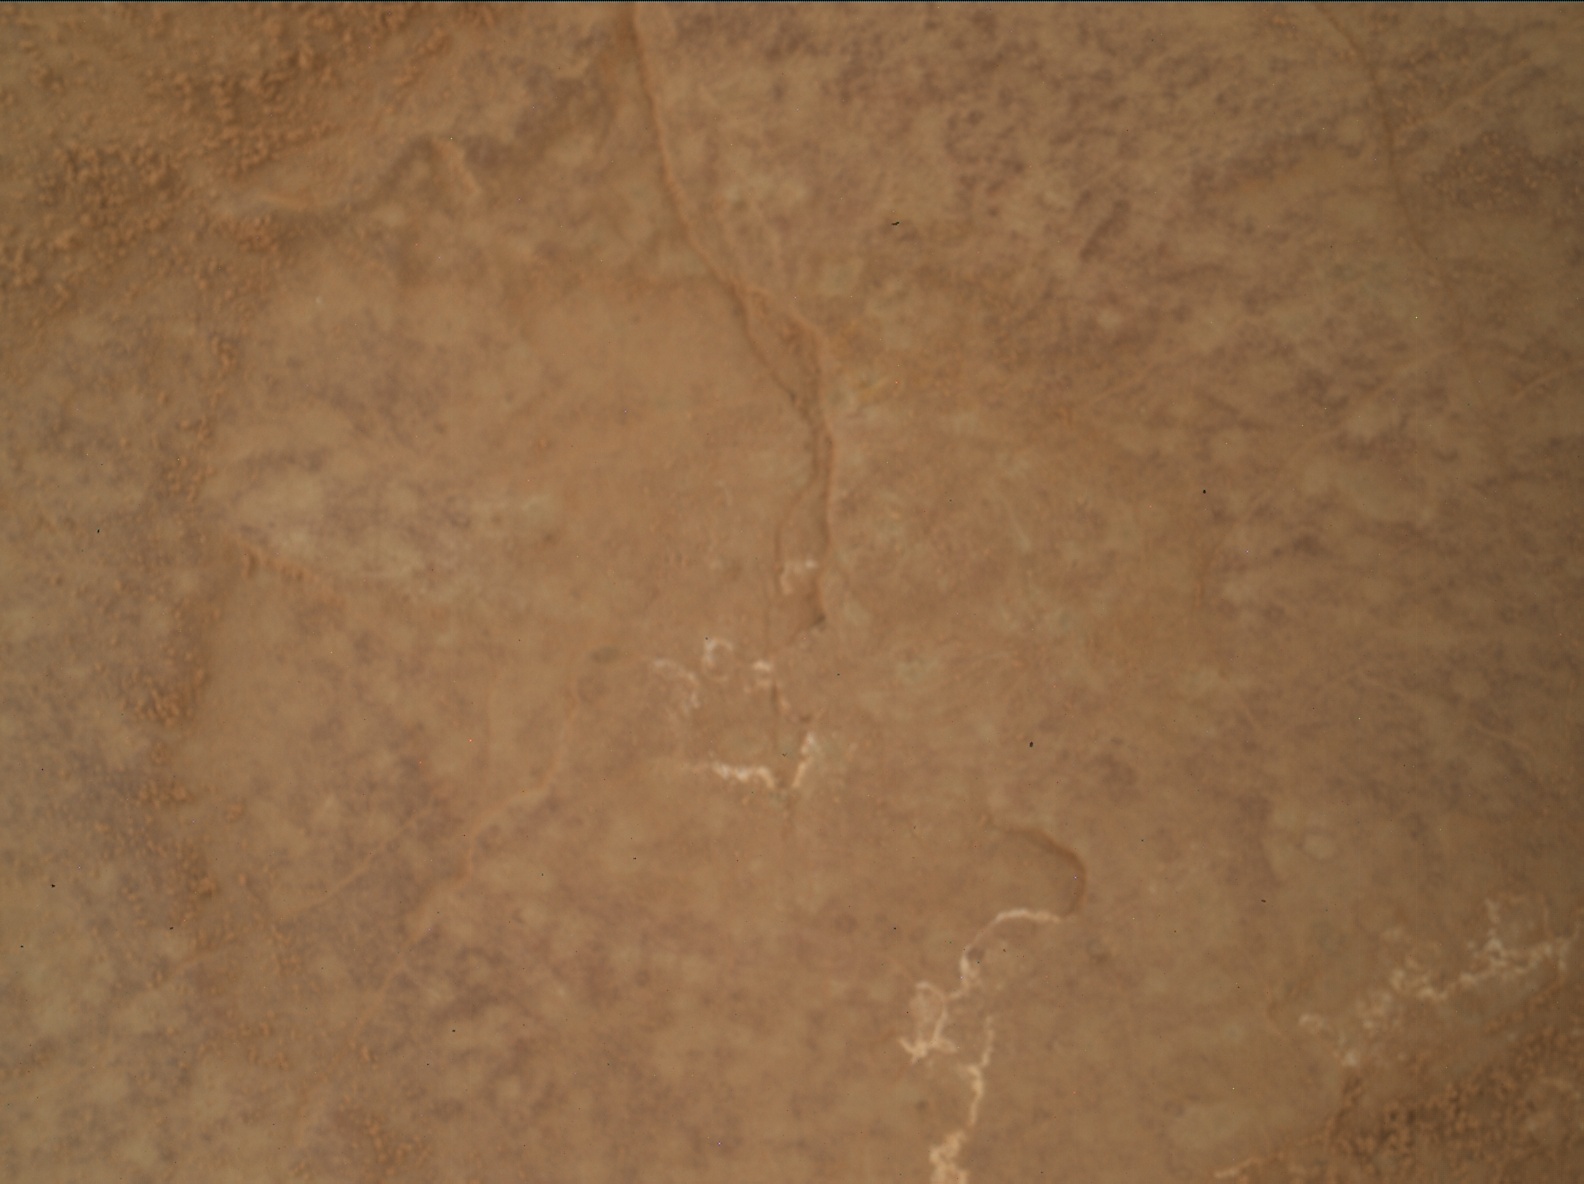 Nasa's Mars rover Curiosity acquired this image using its Mars Hand Lens Imager (MAHLI) on Sol 3024